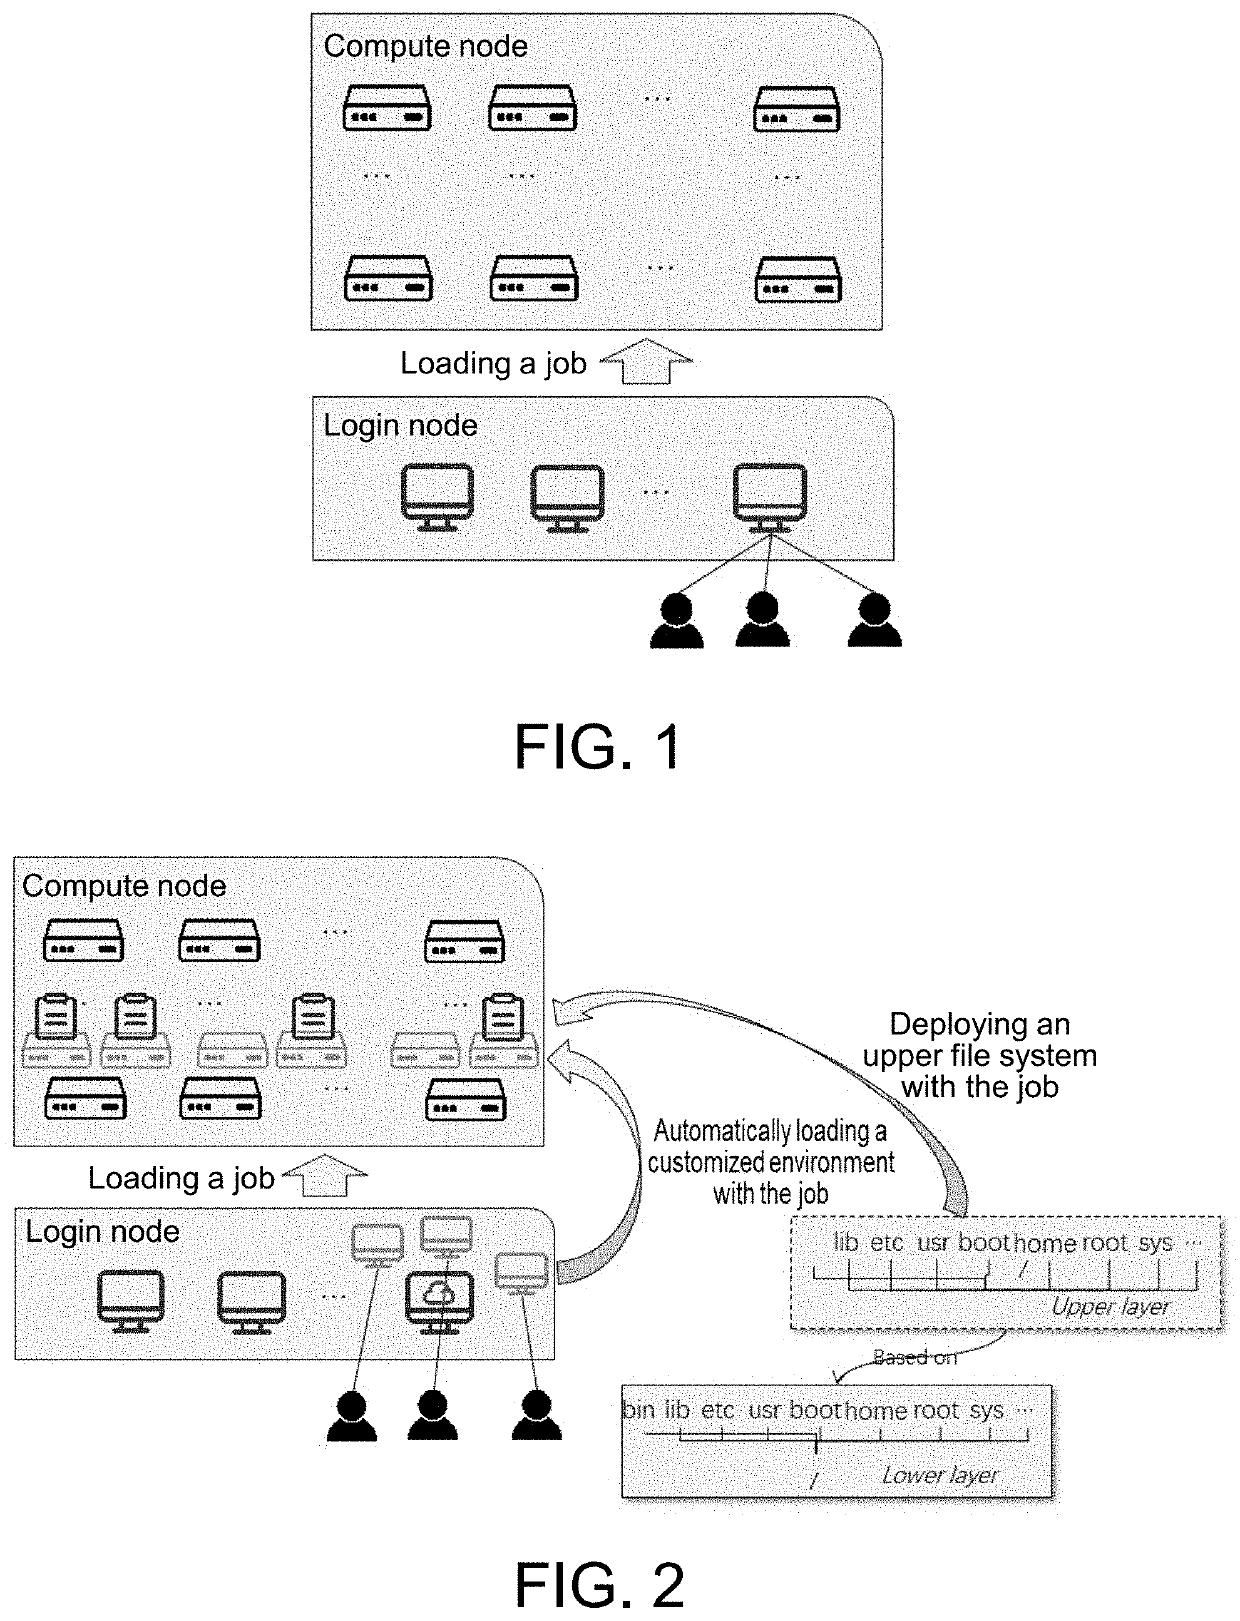 High-performance computing-oriented method for automatically deploying execution environment along with job